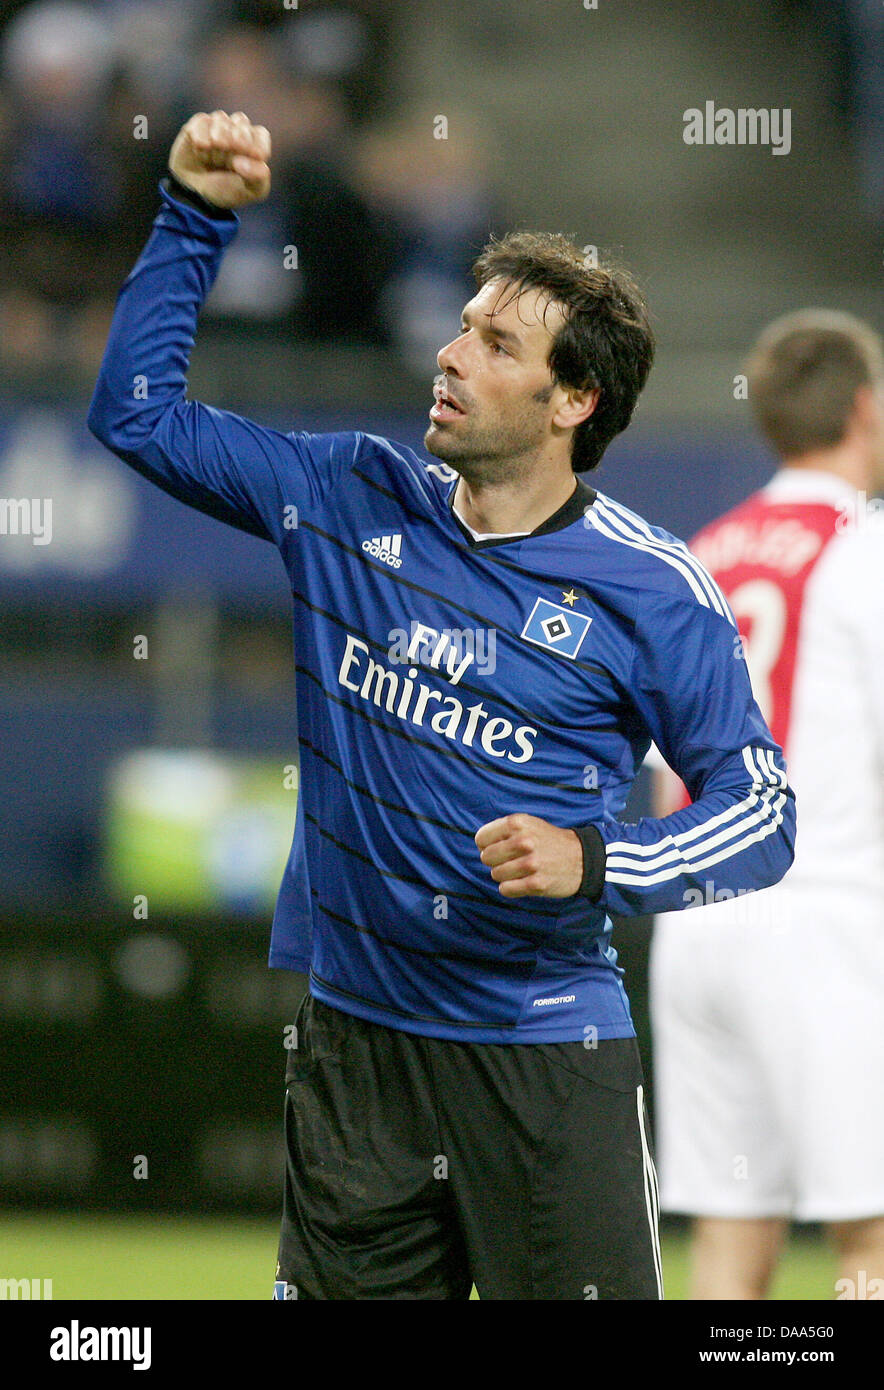 Hamburg's Ruud Van Nistelrooy cheers after the 4-2 goal during a test match  of Hamburger SV versus Ajax Amsterdam in Hamburg, Germany, 8 January 2011.  Photo: Malte Christians Stock Photo - Alamy